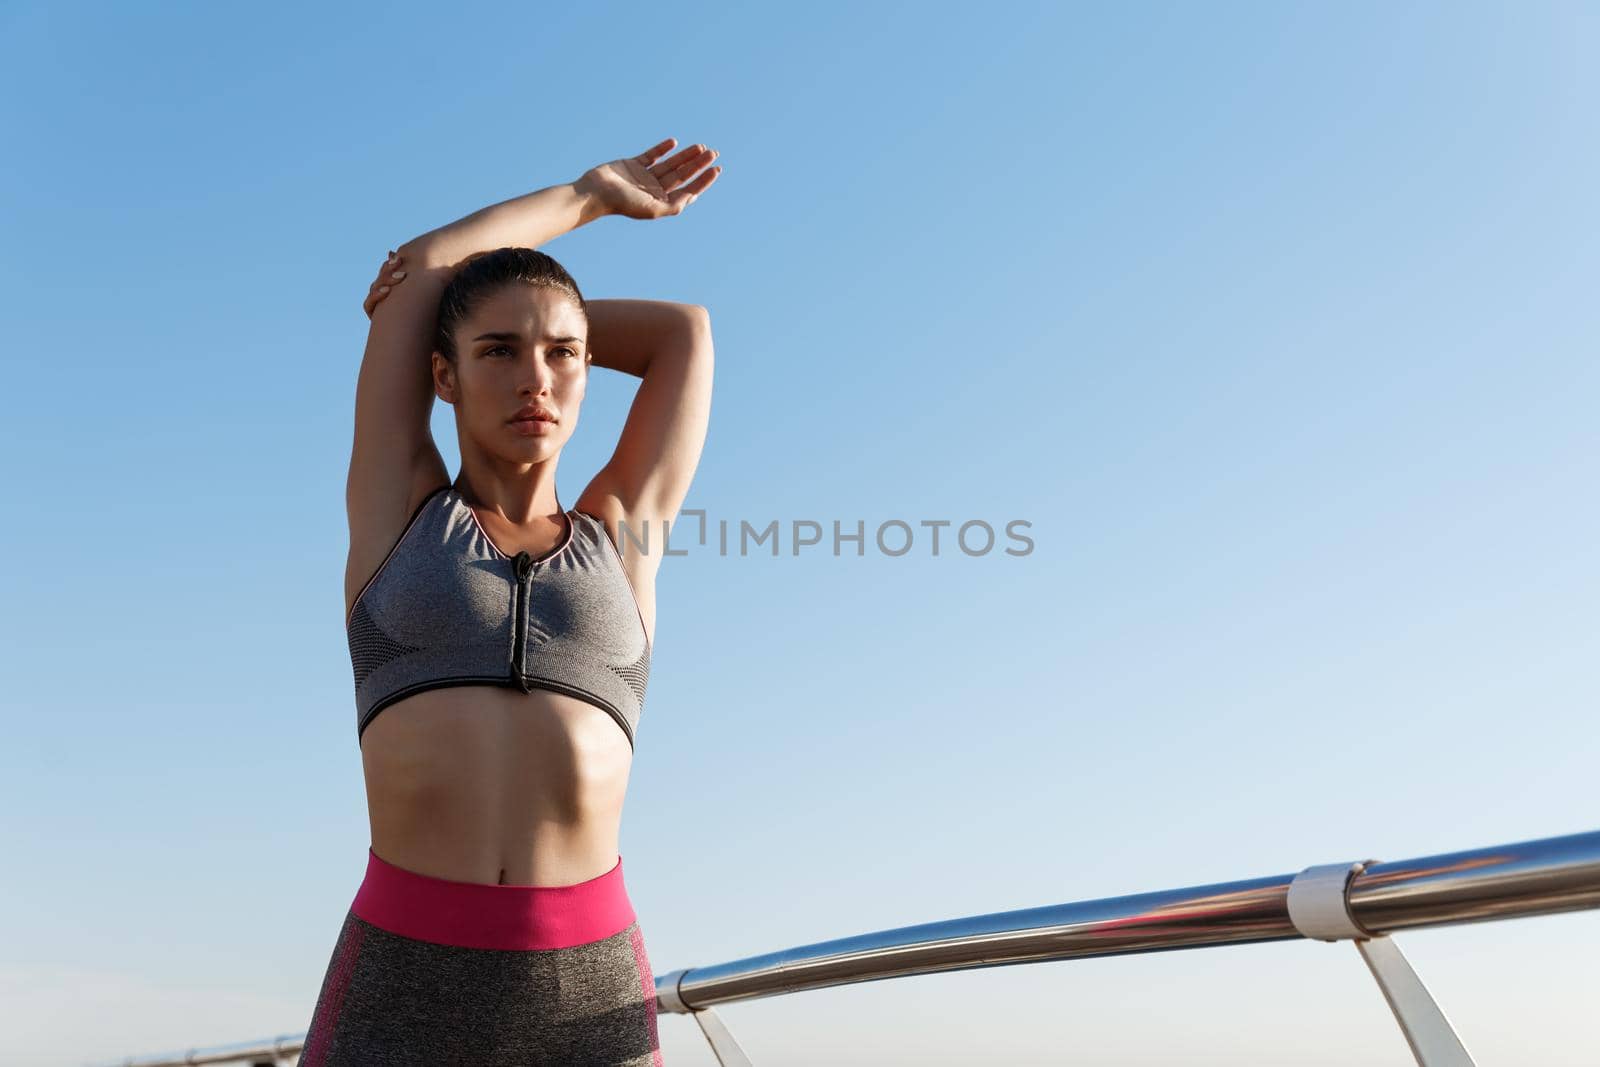 Low angle of attractive woman stretching and warming-up before jogging workout, looking determined forward, standing on a pier with sky behind her.